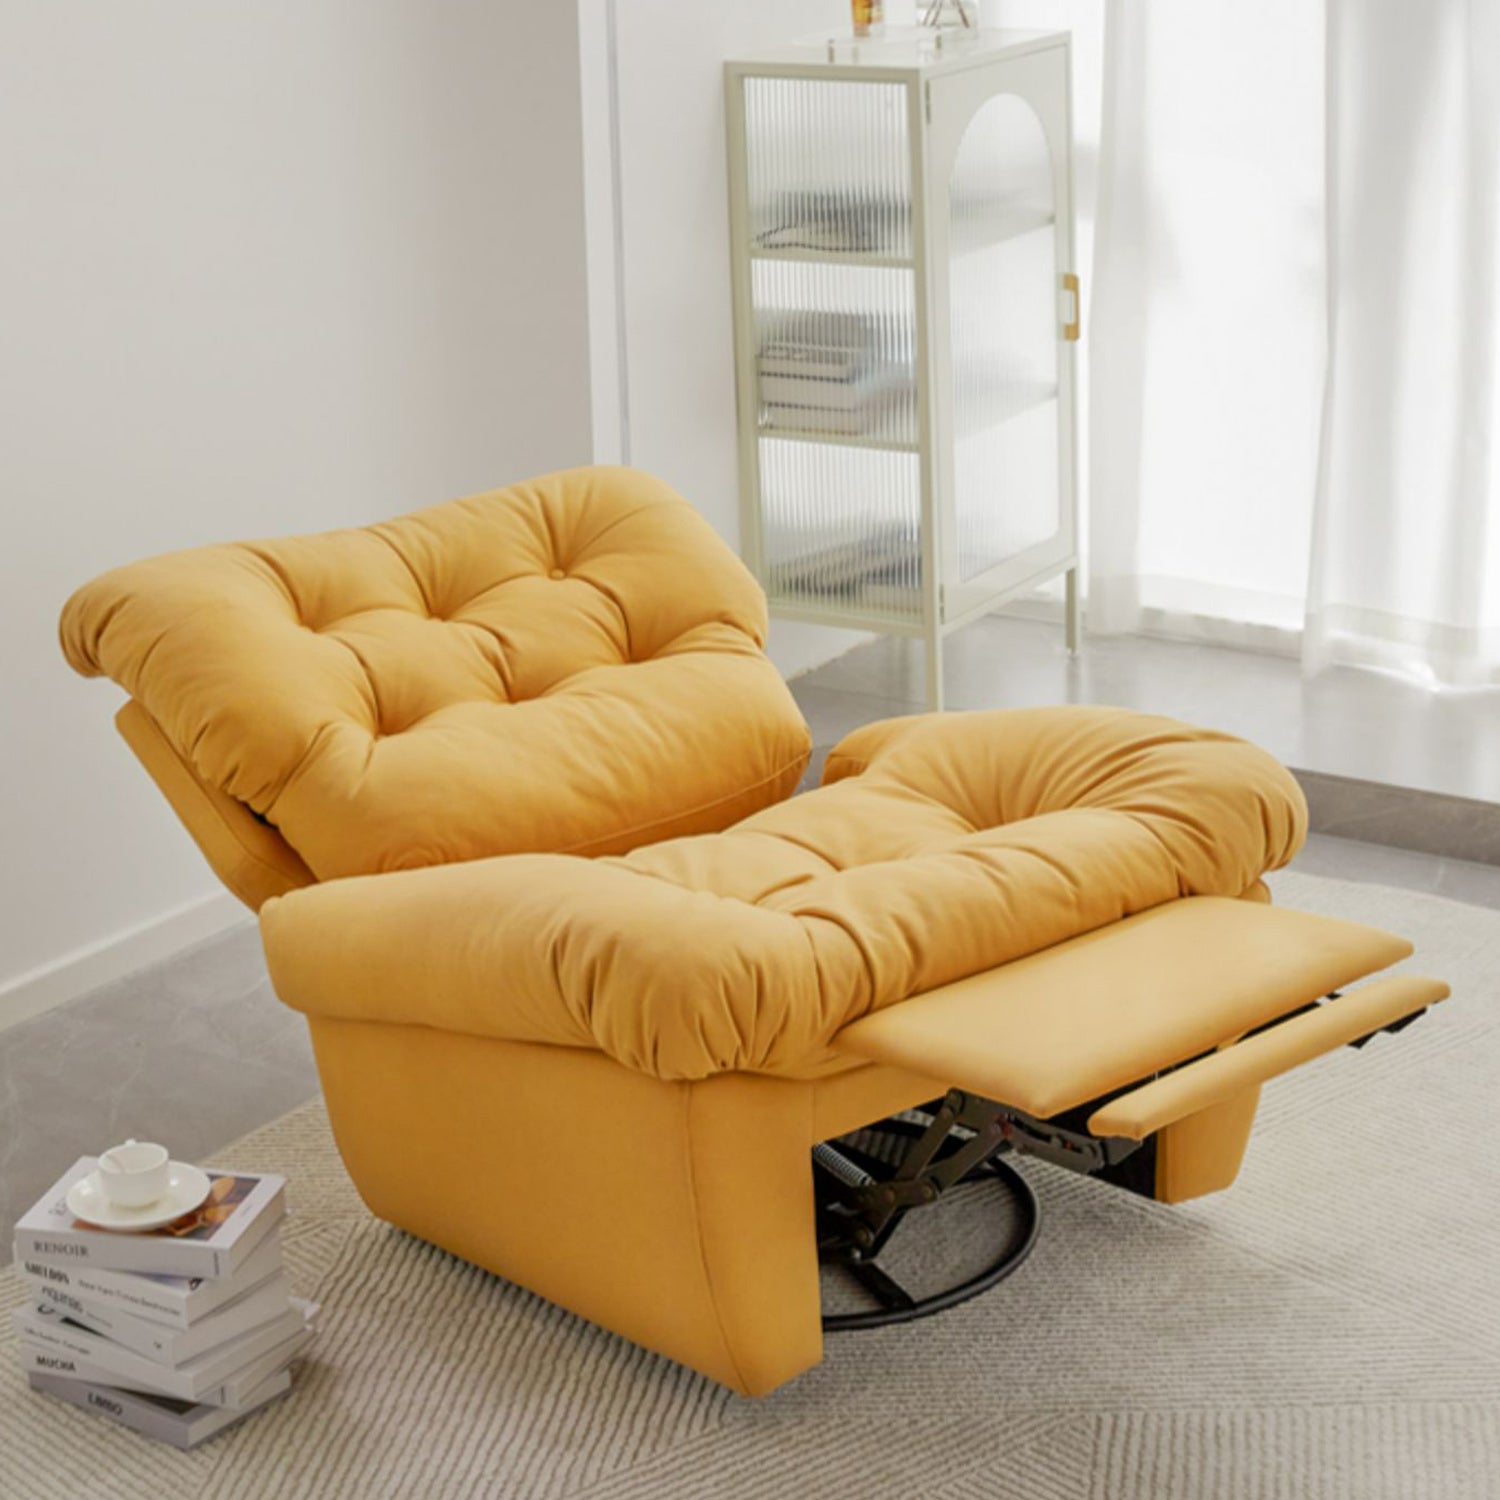 Removable Cushions Recliner Chair Power Reclining Type Standard Recliner